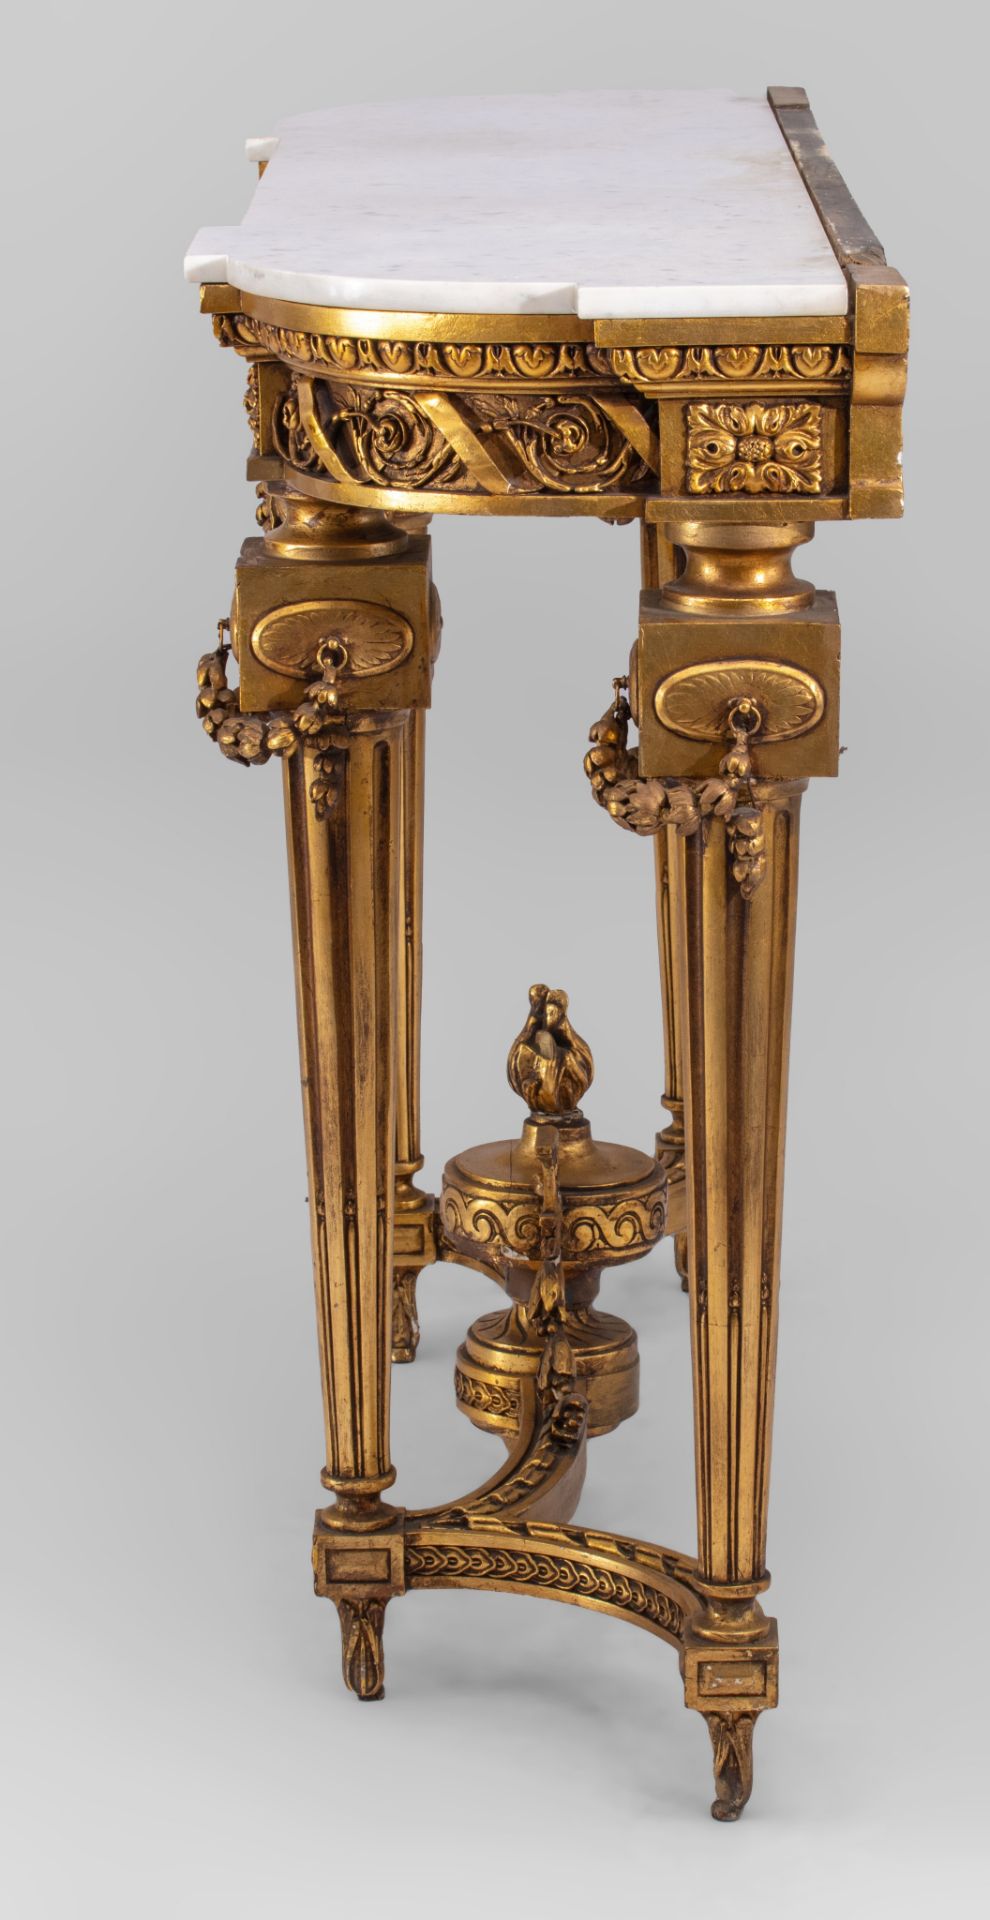 An imposing Neoclassical console table and matching wall mirror, H 92 - W 137 - D 40 - 116 x 191 cm - Image 8 of 11